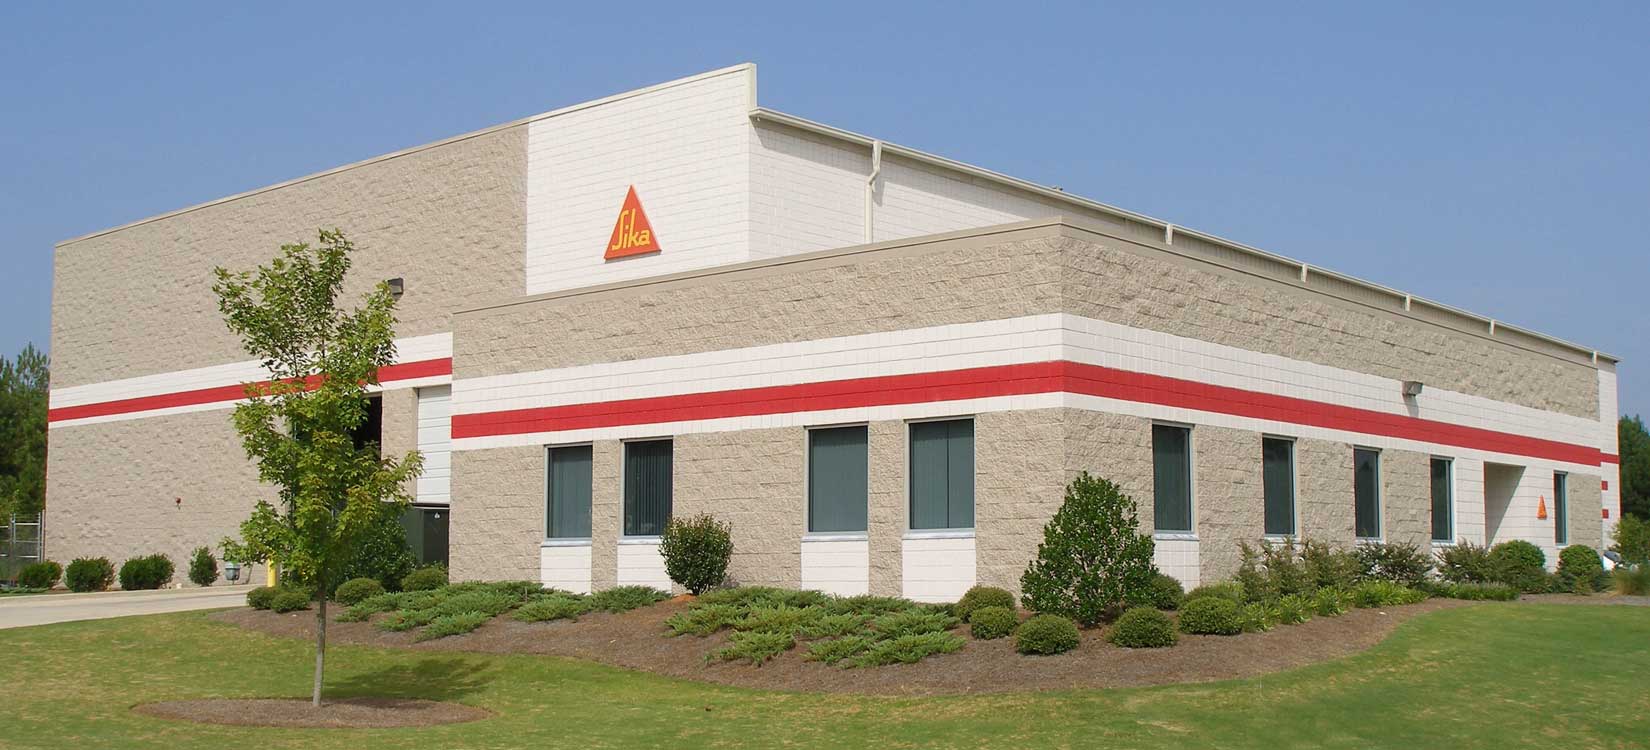 Image of Sika just outside of Atlanta GA.  This is a pre-engineered metal building with a metal roofing system.  Fox Building Company is a commercial construction general contractor specializing in furnish and erect pre-engineered metal building by Nucor Building Systems and Design Build construction.